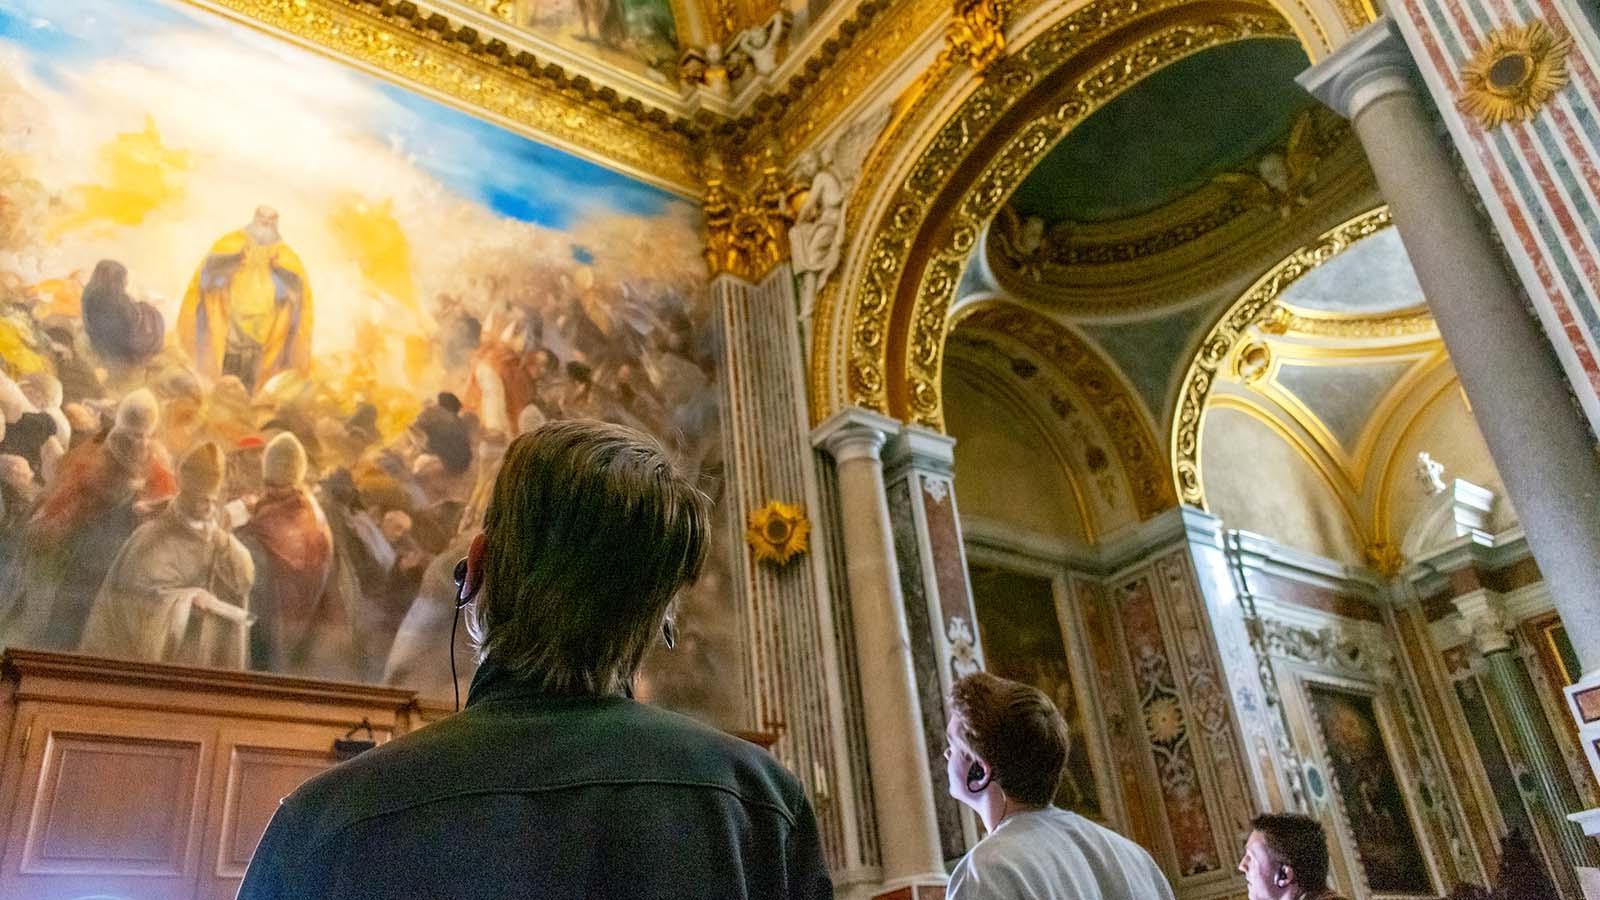 Three students studying abroad in Rome listening to commentary on headsets while admiring a classical painting in a museum